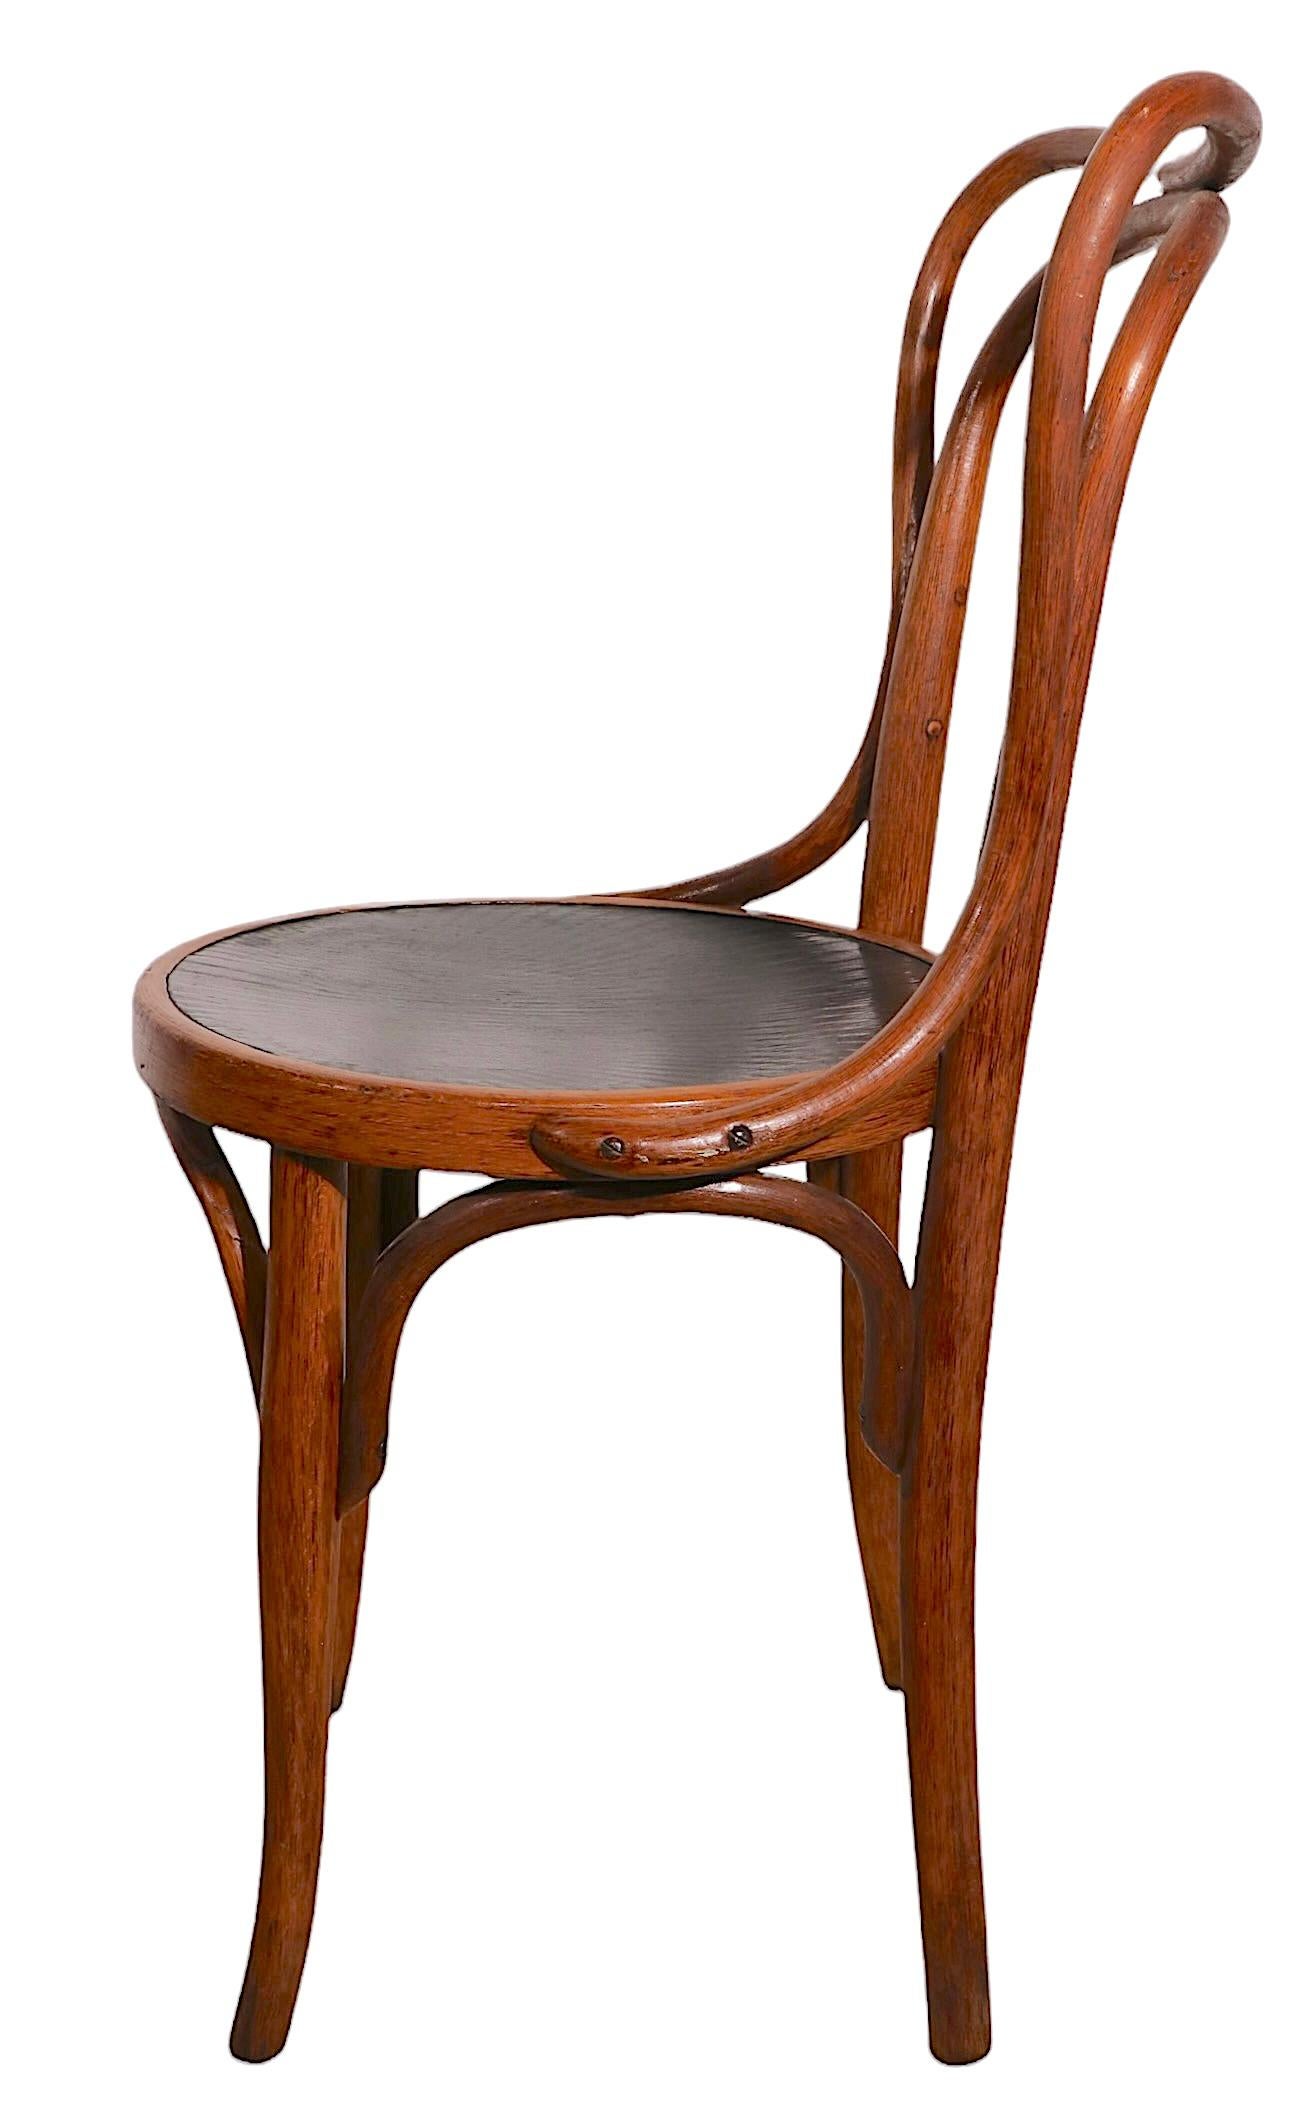 19th Century Early JJ Kohn Secessionist Bentwood Dining Side Cafe Chair Made in Austria